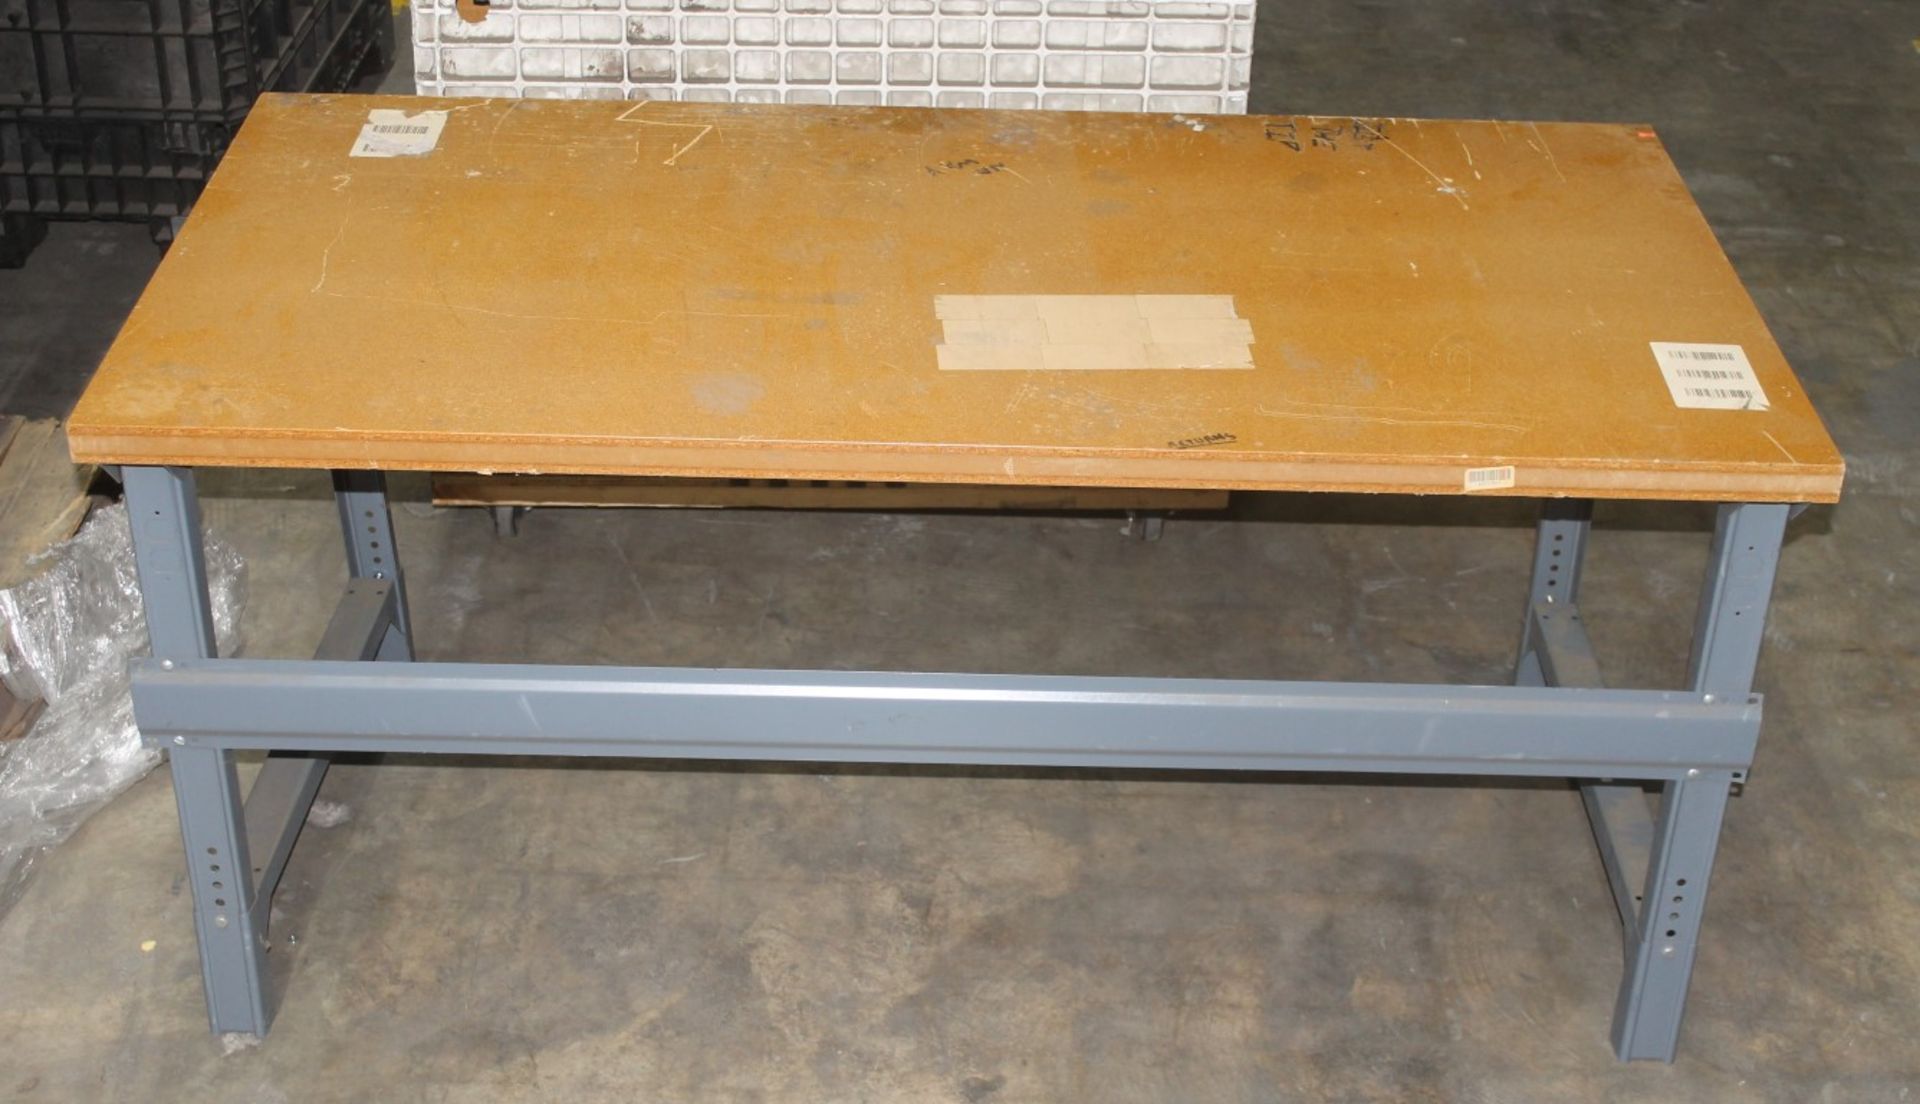 72"W X 36"D HEAVY DUTY WORK BENCH WITH 1-1/2" WOODEN TOP